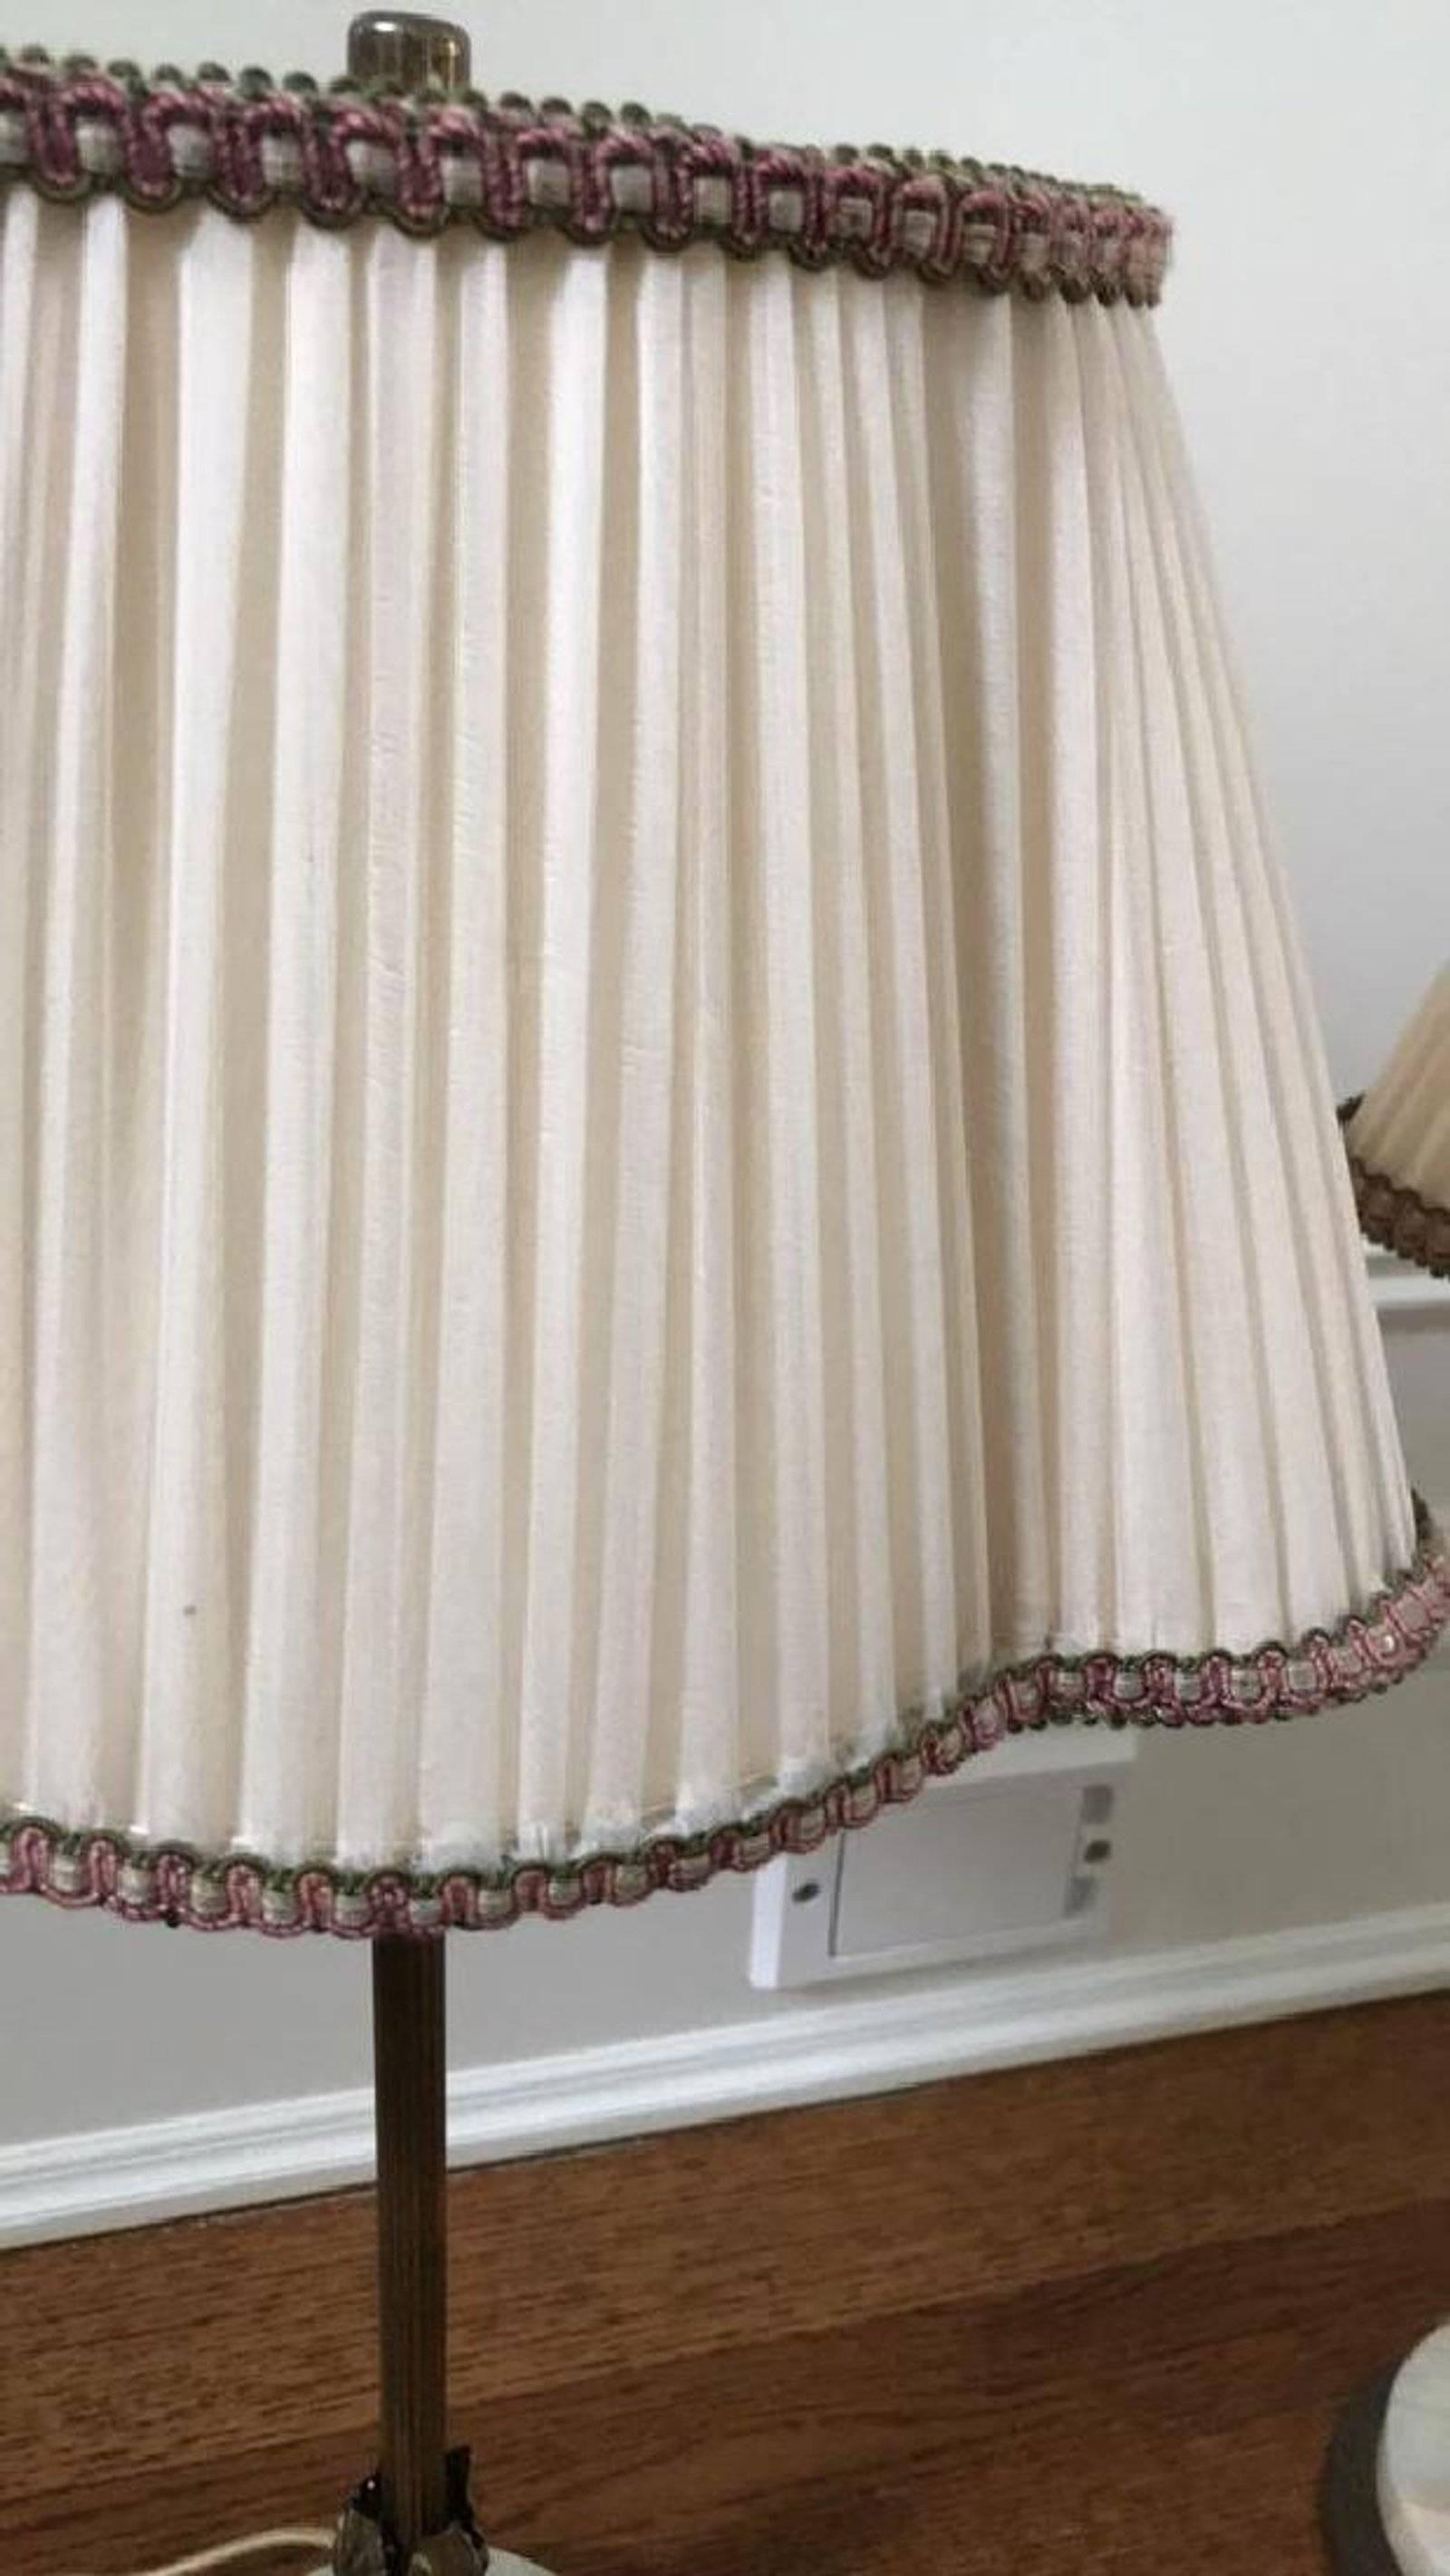 Pair of elegant French style boudoir bedroom lamps with slender fluted stem and acanthus at the end mounted on round marble base with silk shades. Dimensions: H 22